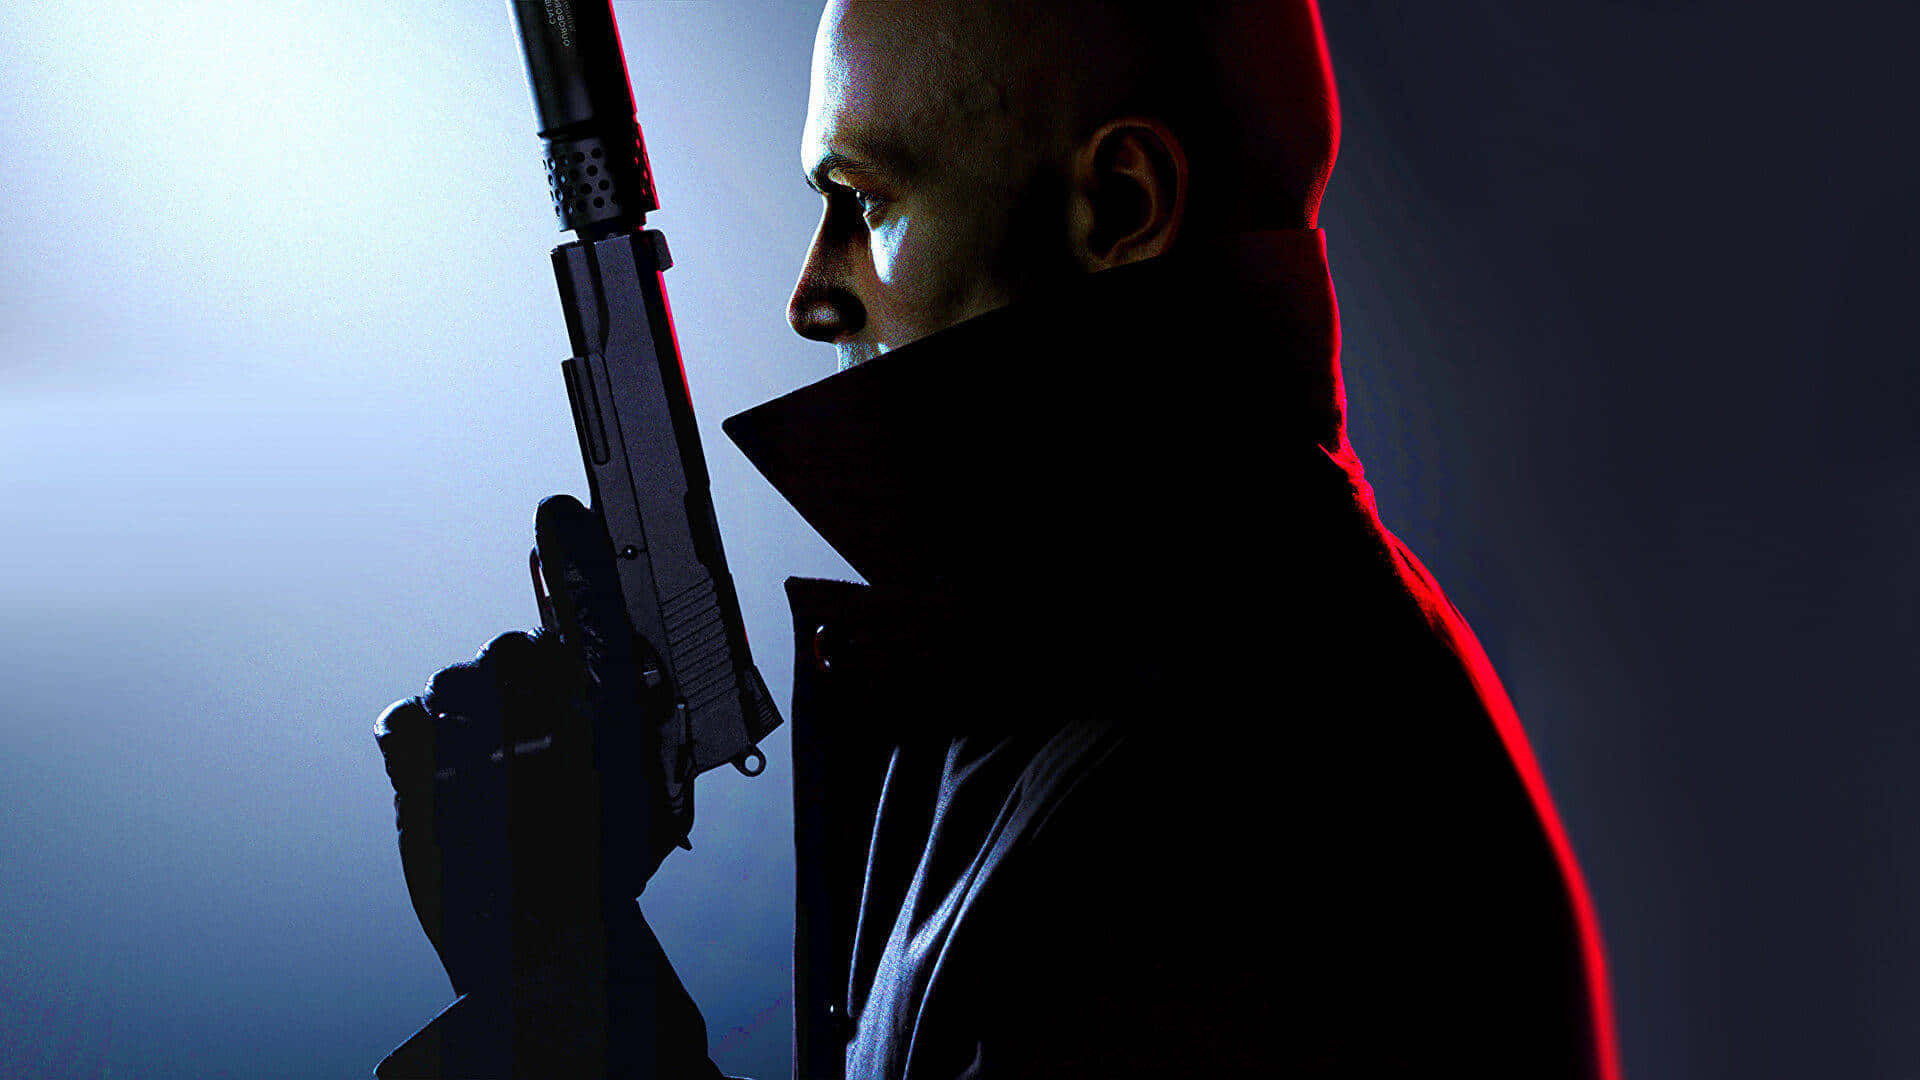 Get Your Revenge as Agent 47 in “Hitman 2”